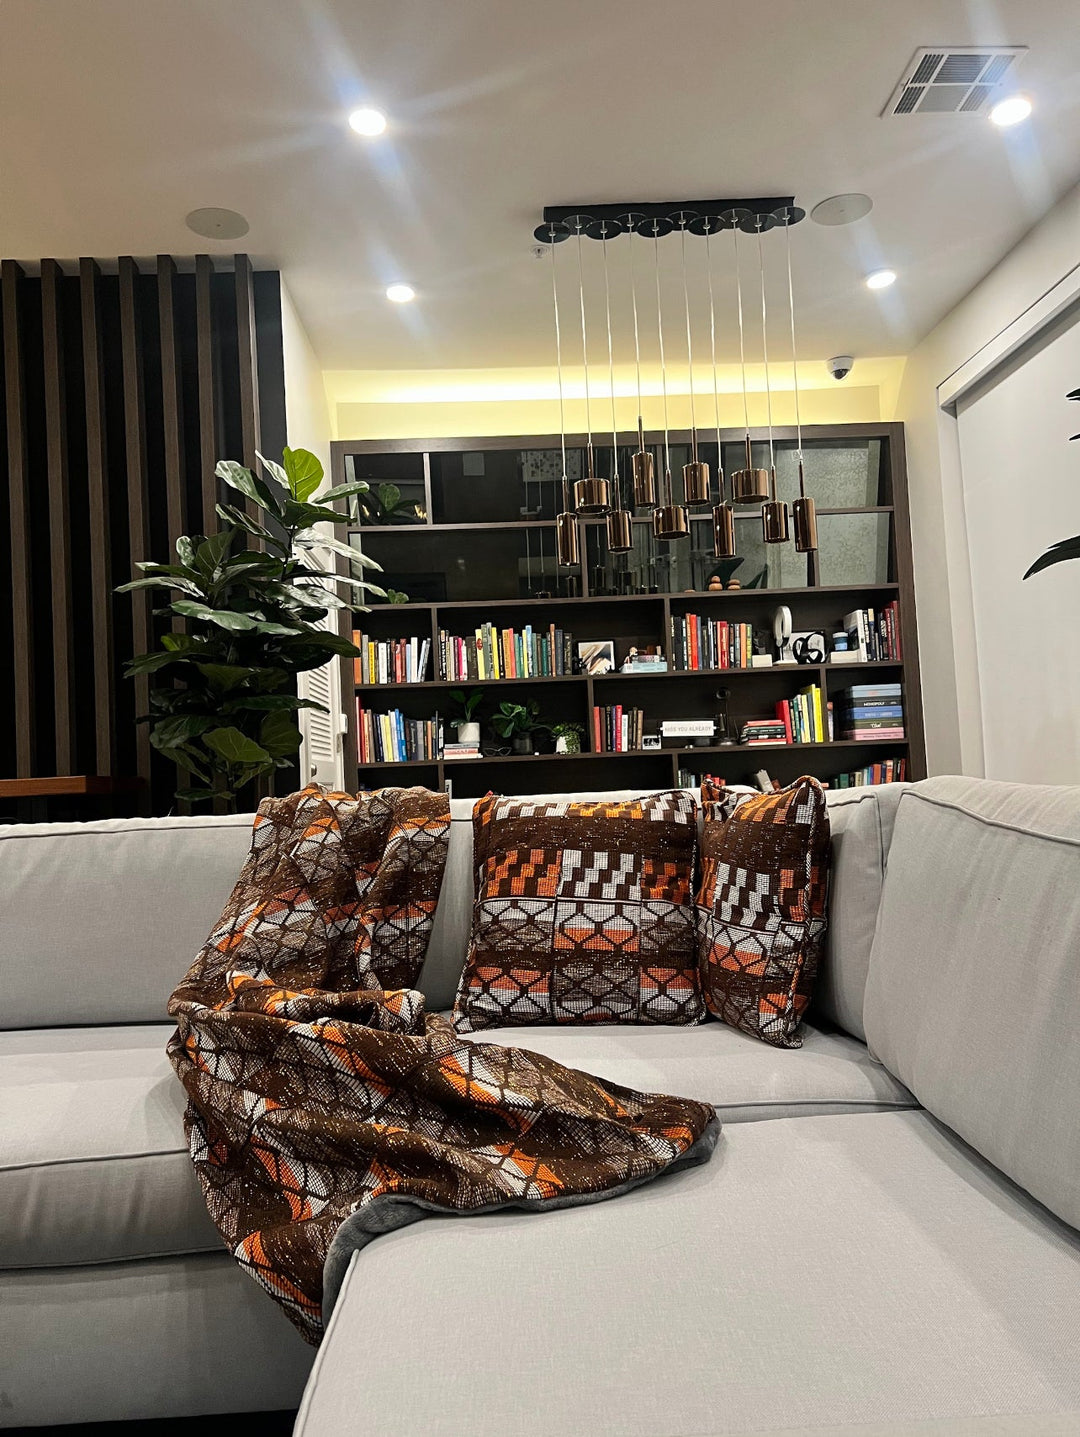 Experience the artistry of traditional Kente fabric in these beautifully designed throw pillows & blanket- perfect for Kente-inspired home interiors